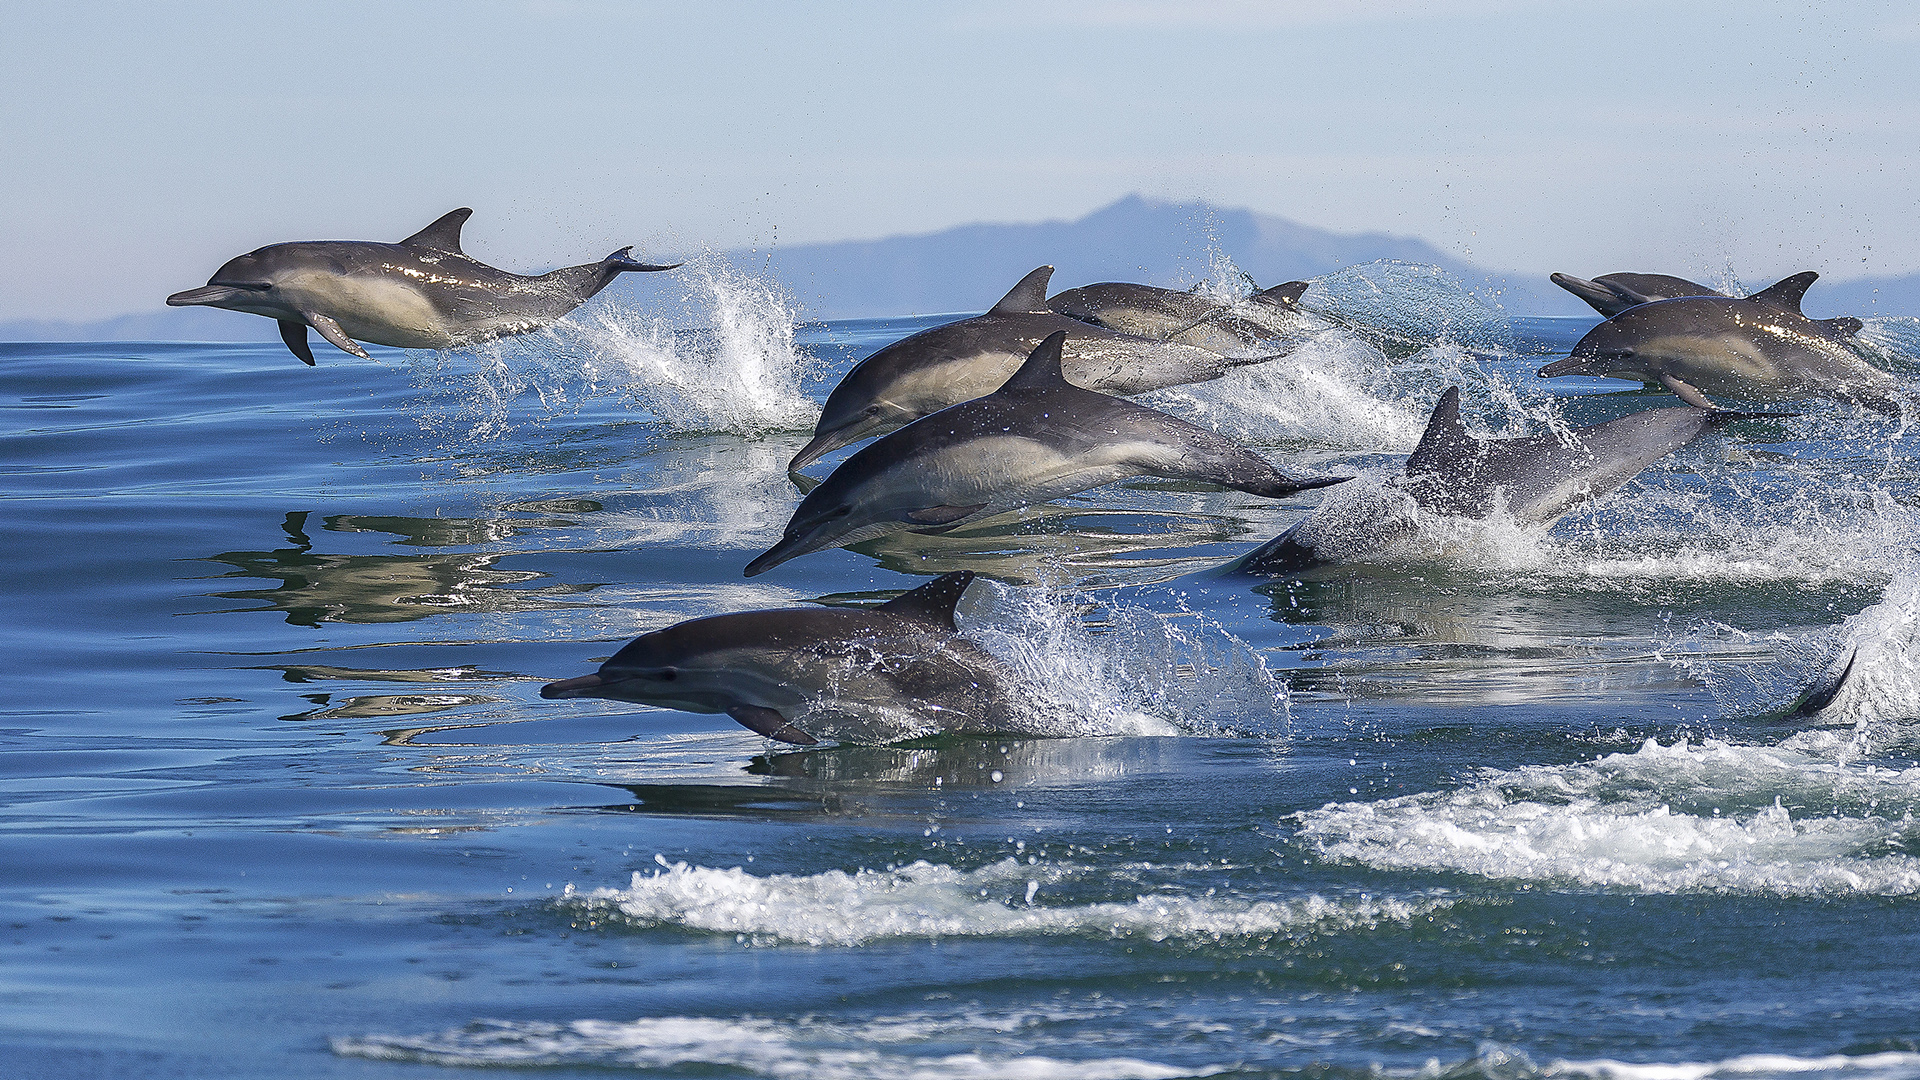 A pod of bottlenose dolphins leaping from the water